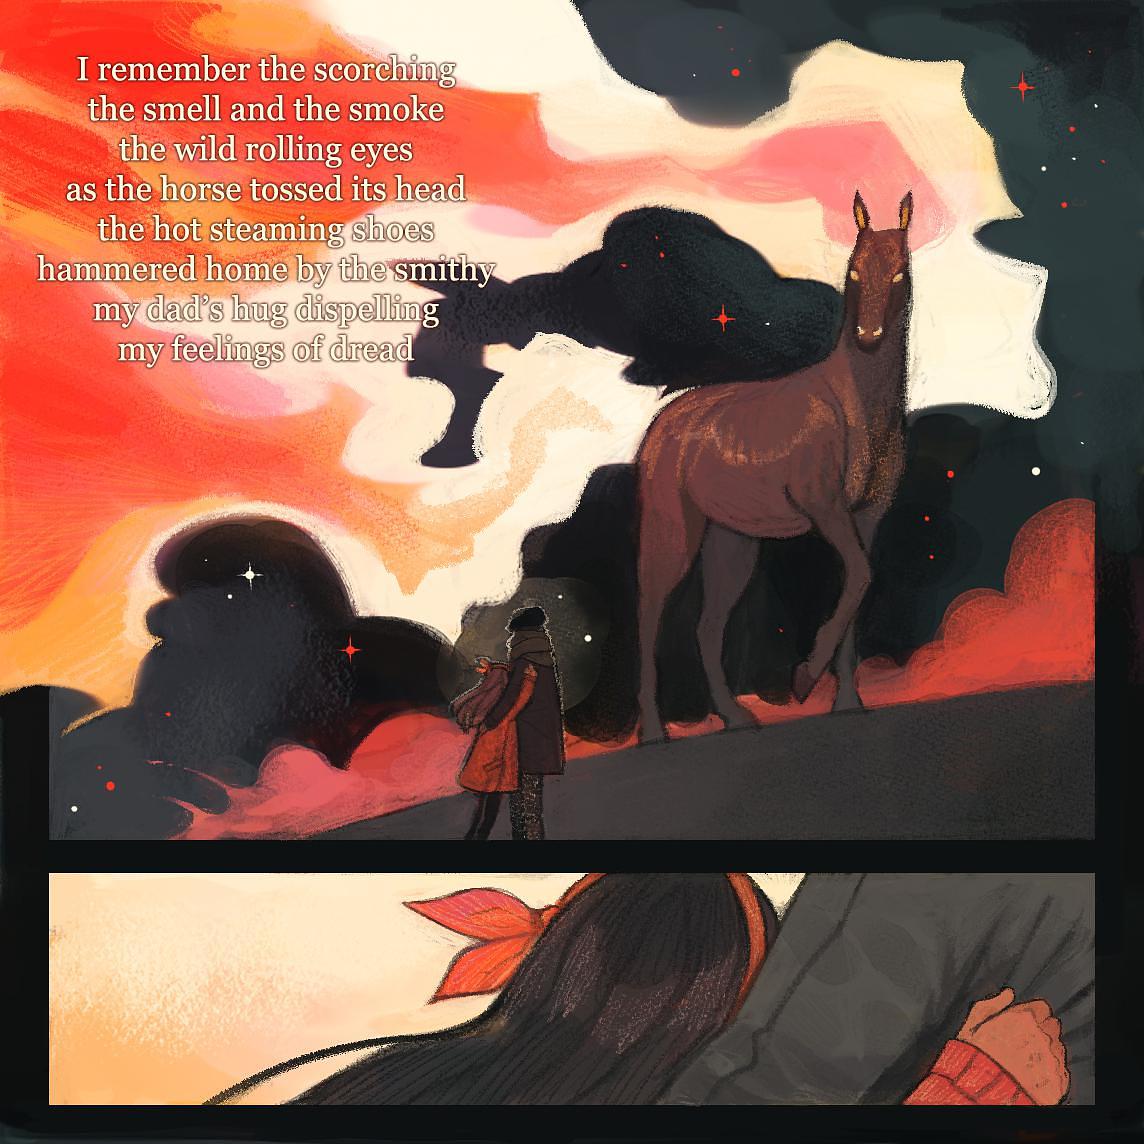 Two panel comic. Comic panel one shows wild horse standing on a small hill against the backdrop of the starry sky, flames and red smoke. It towers above the father and daughter who are looking up at it whilst hugging. The flames are overlaid with stanza 4 of Epona. Comic panel two shows close up of the child, clinging onto her dad's coat so the material ruffles. 